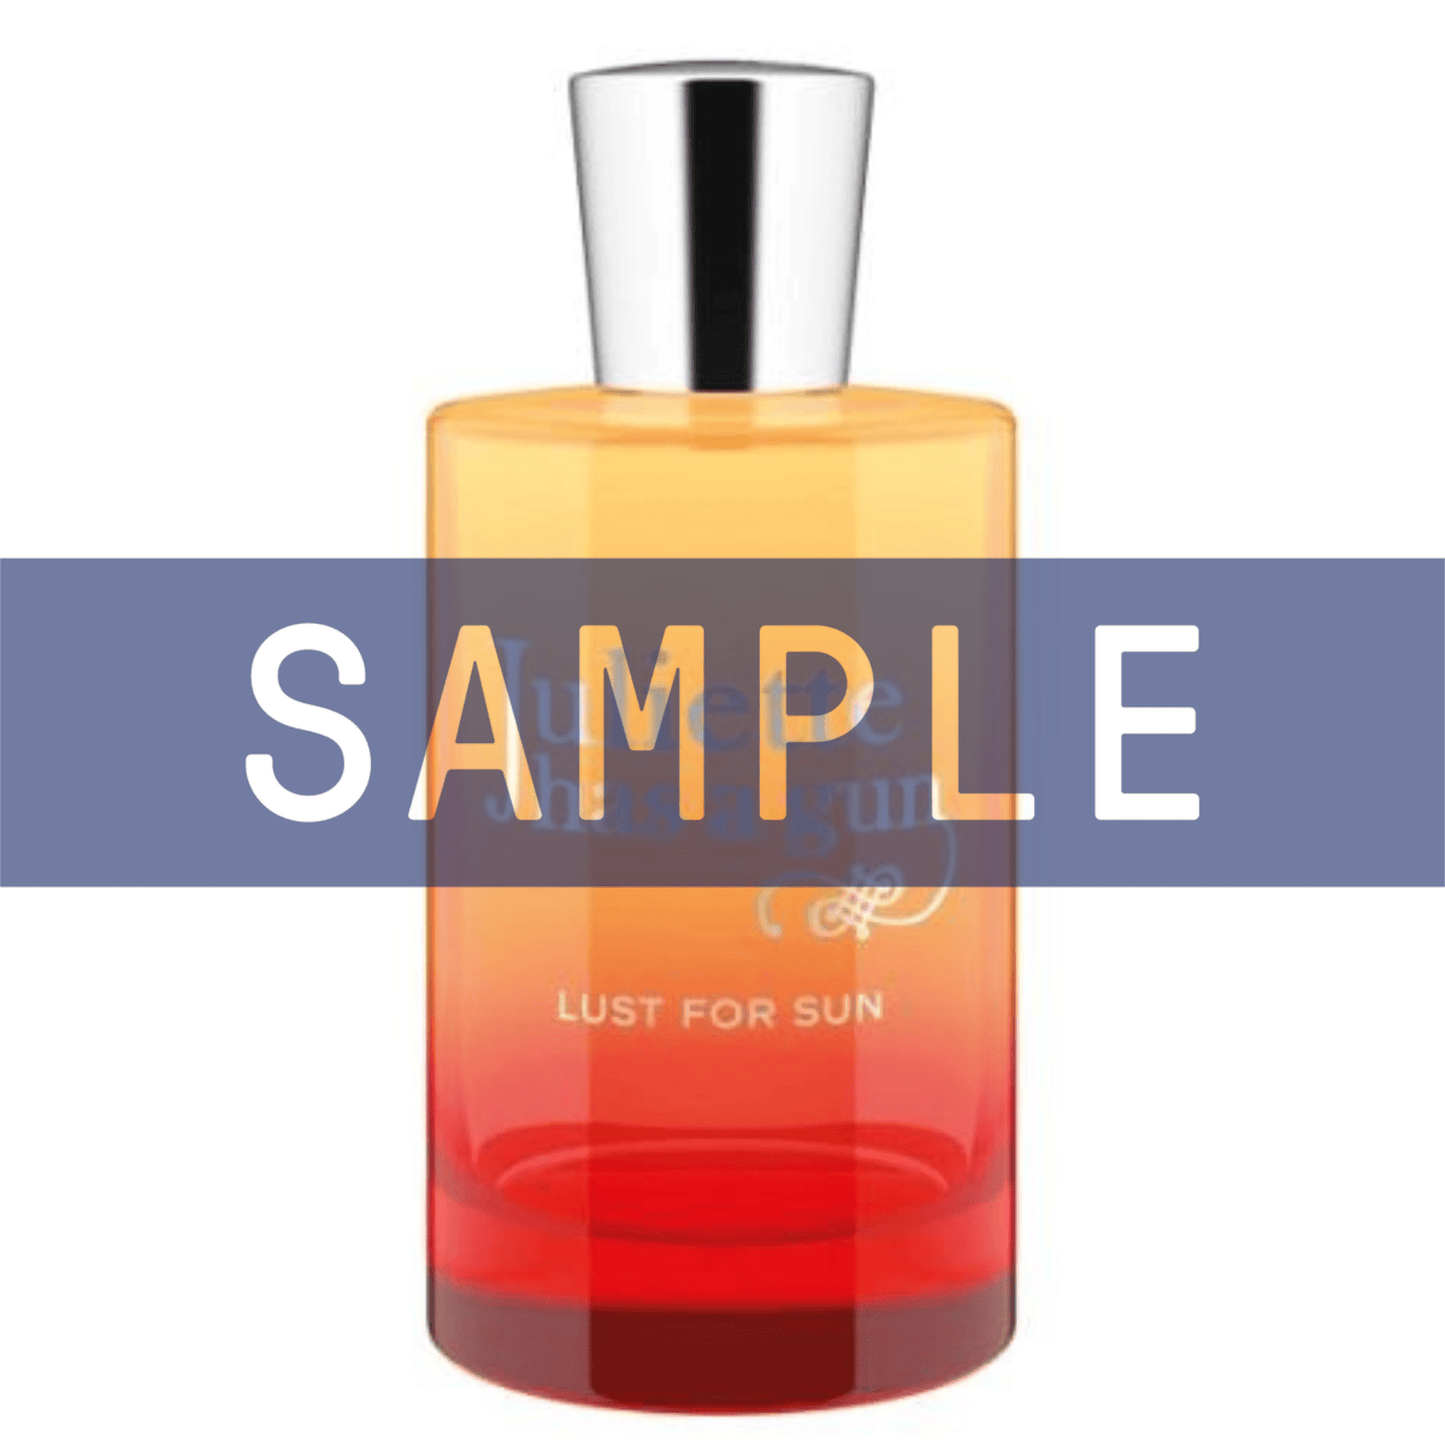 Primary Image of Sample - Lust For Sun EDP